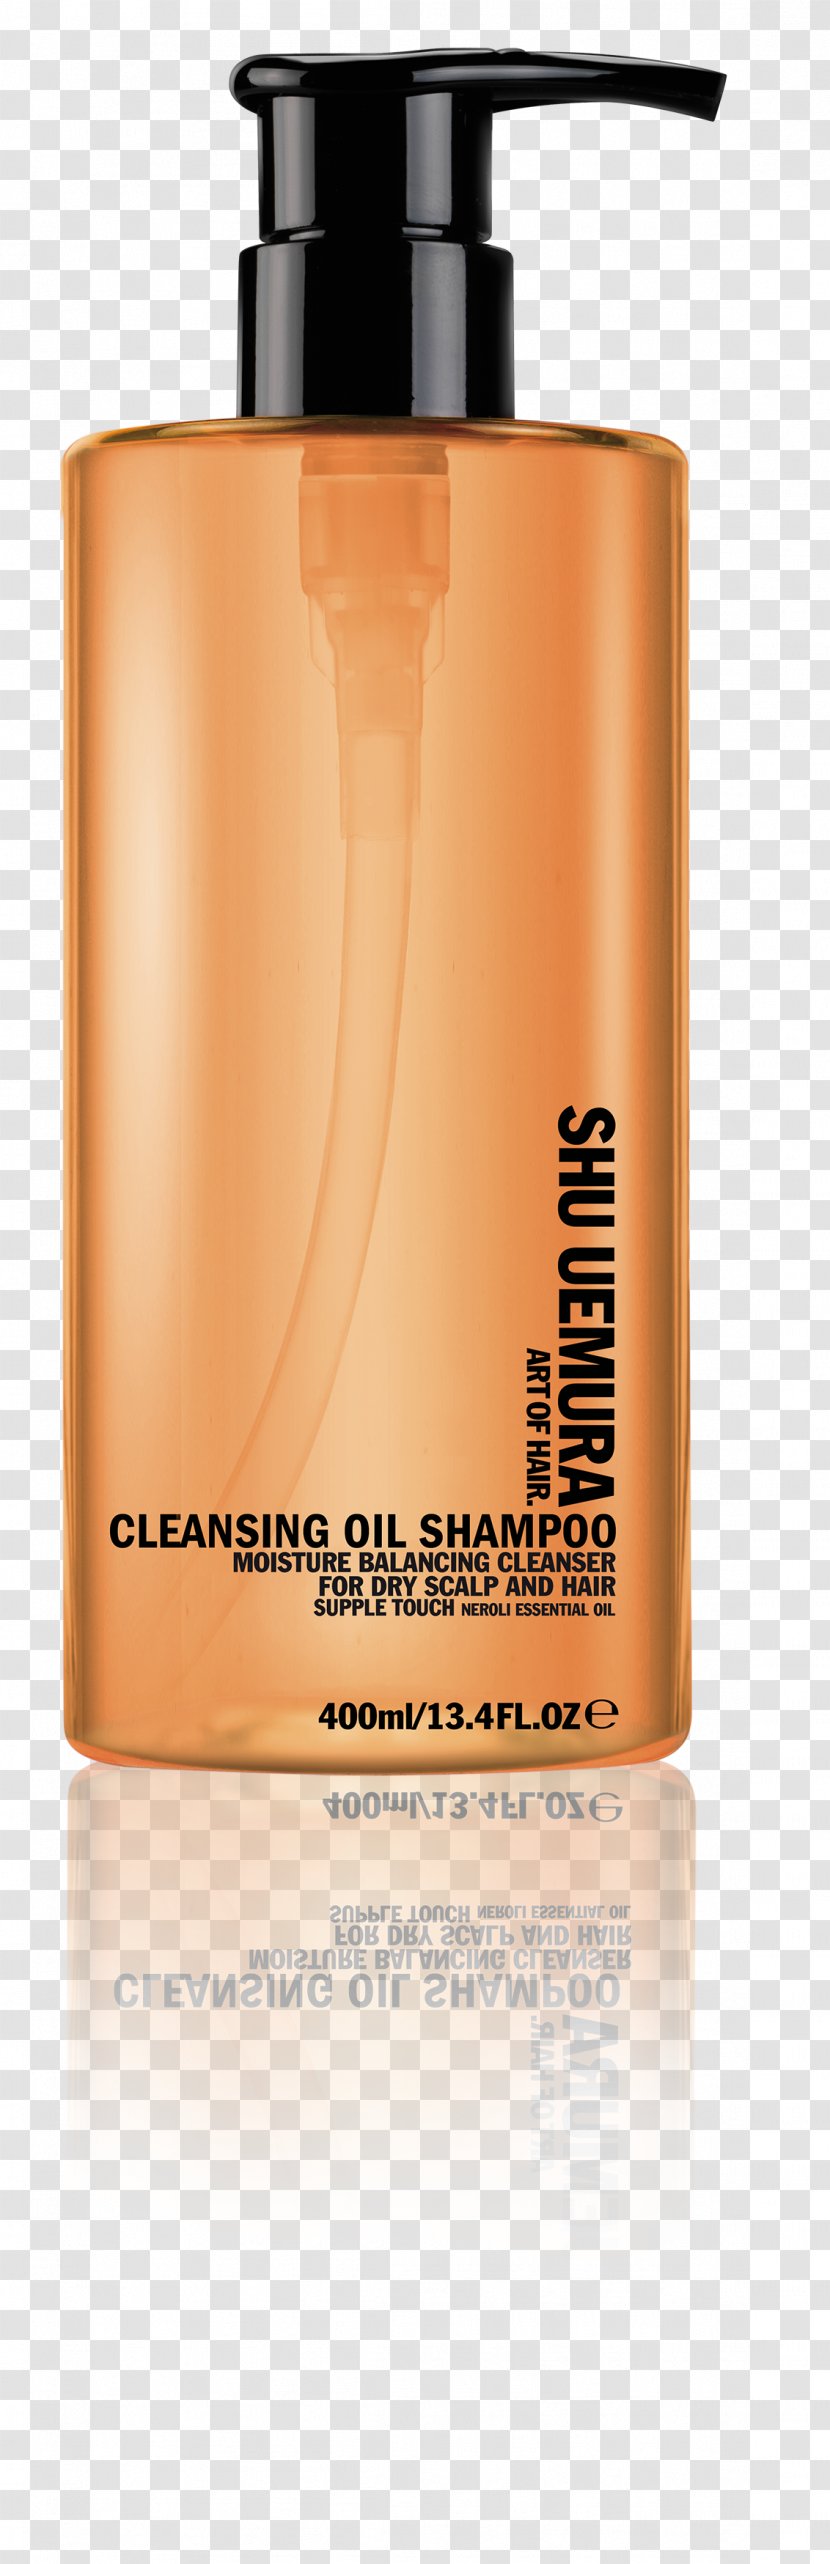 Shu Uemura Art Of Hair Travel-Size Cleansing Oil Shampoo Care Conditioner Cosmetics Transparent PNG